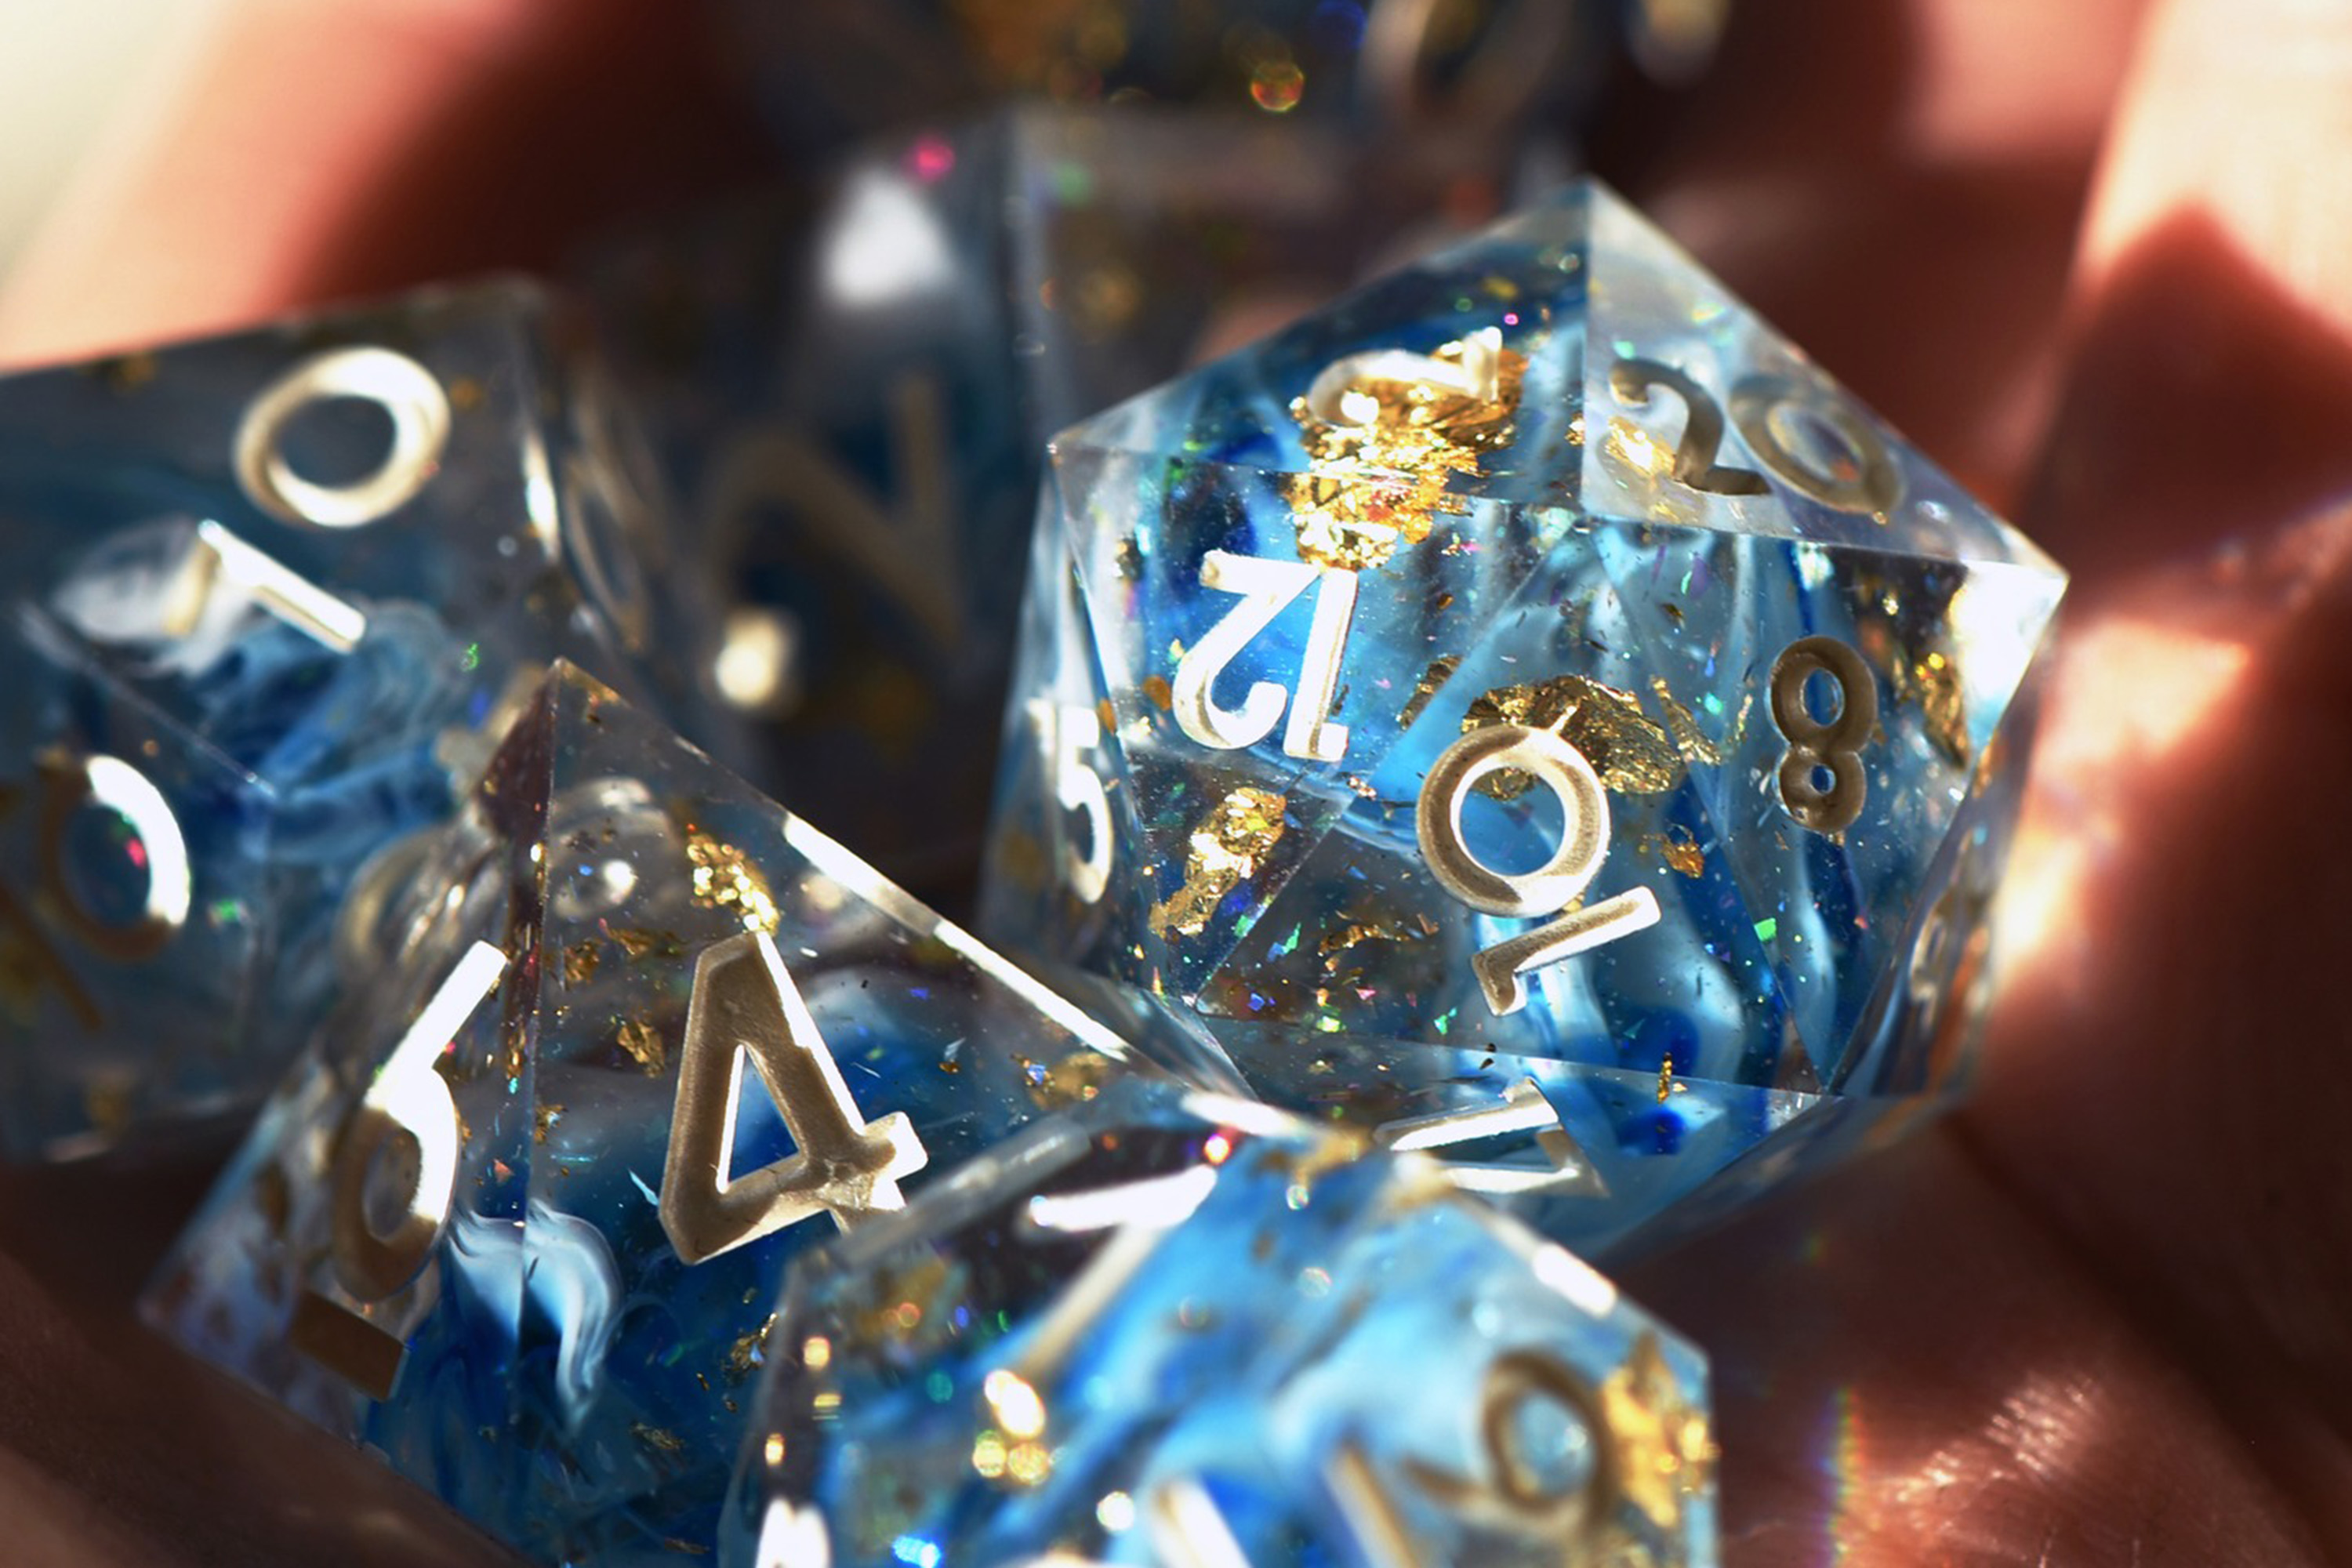 Blue and gold-flecked dice refract light into the holder’s hand. 